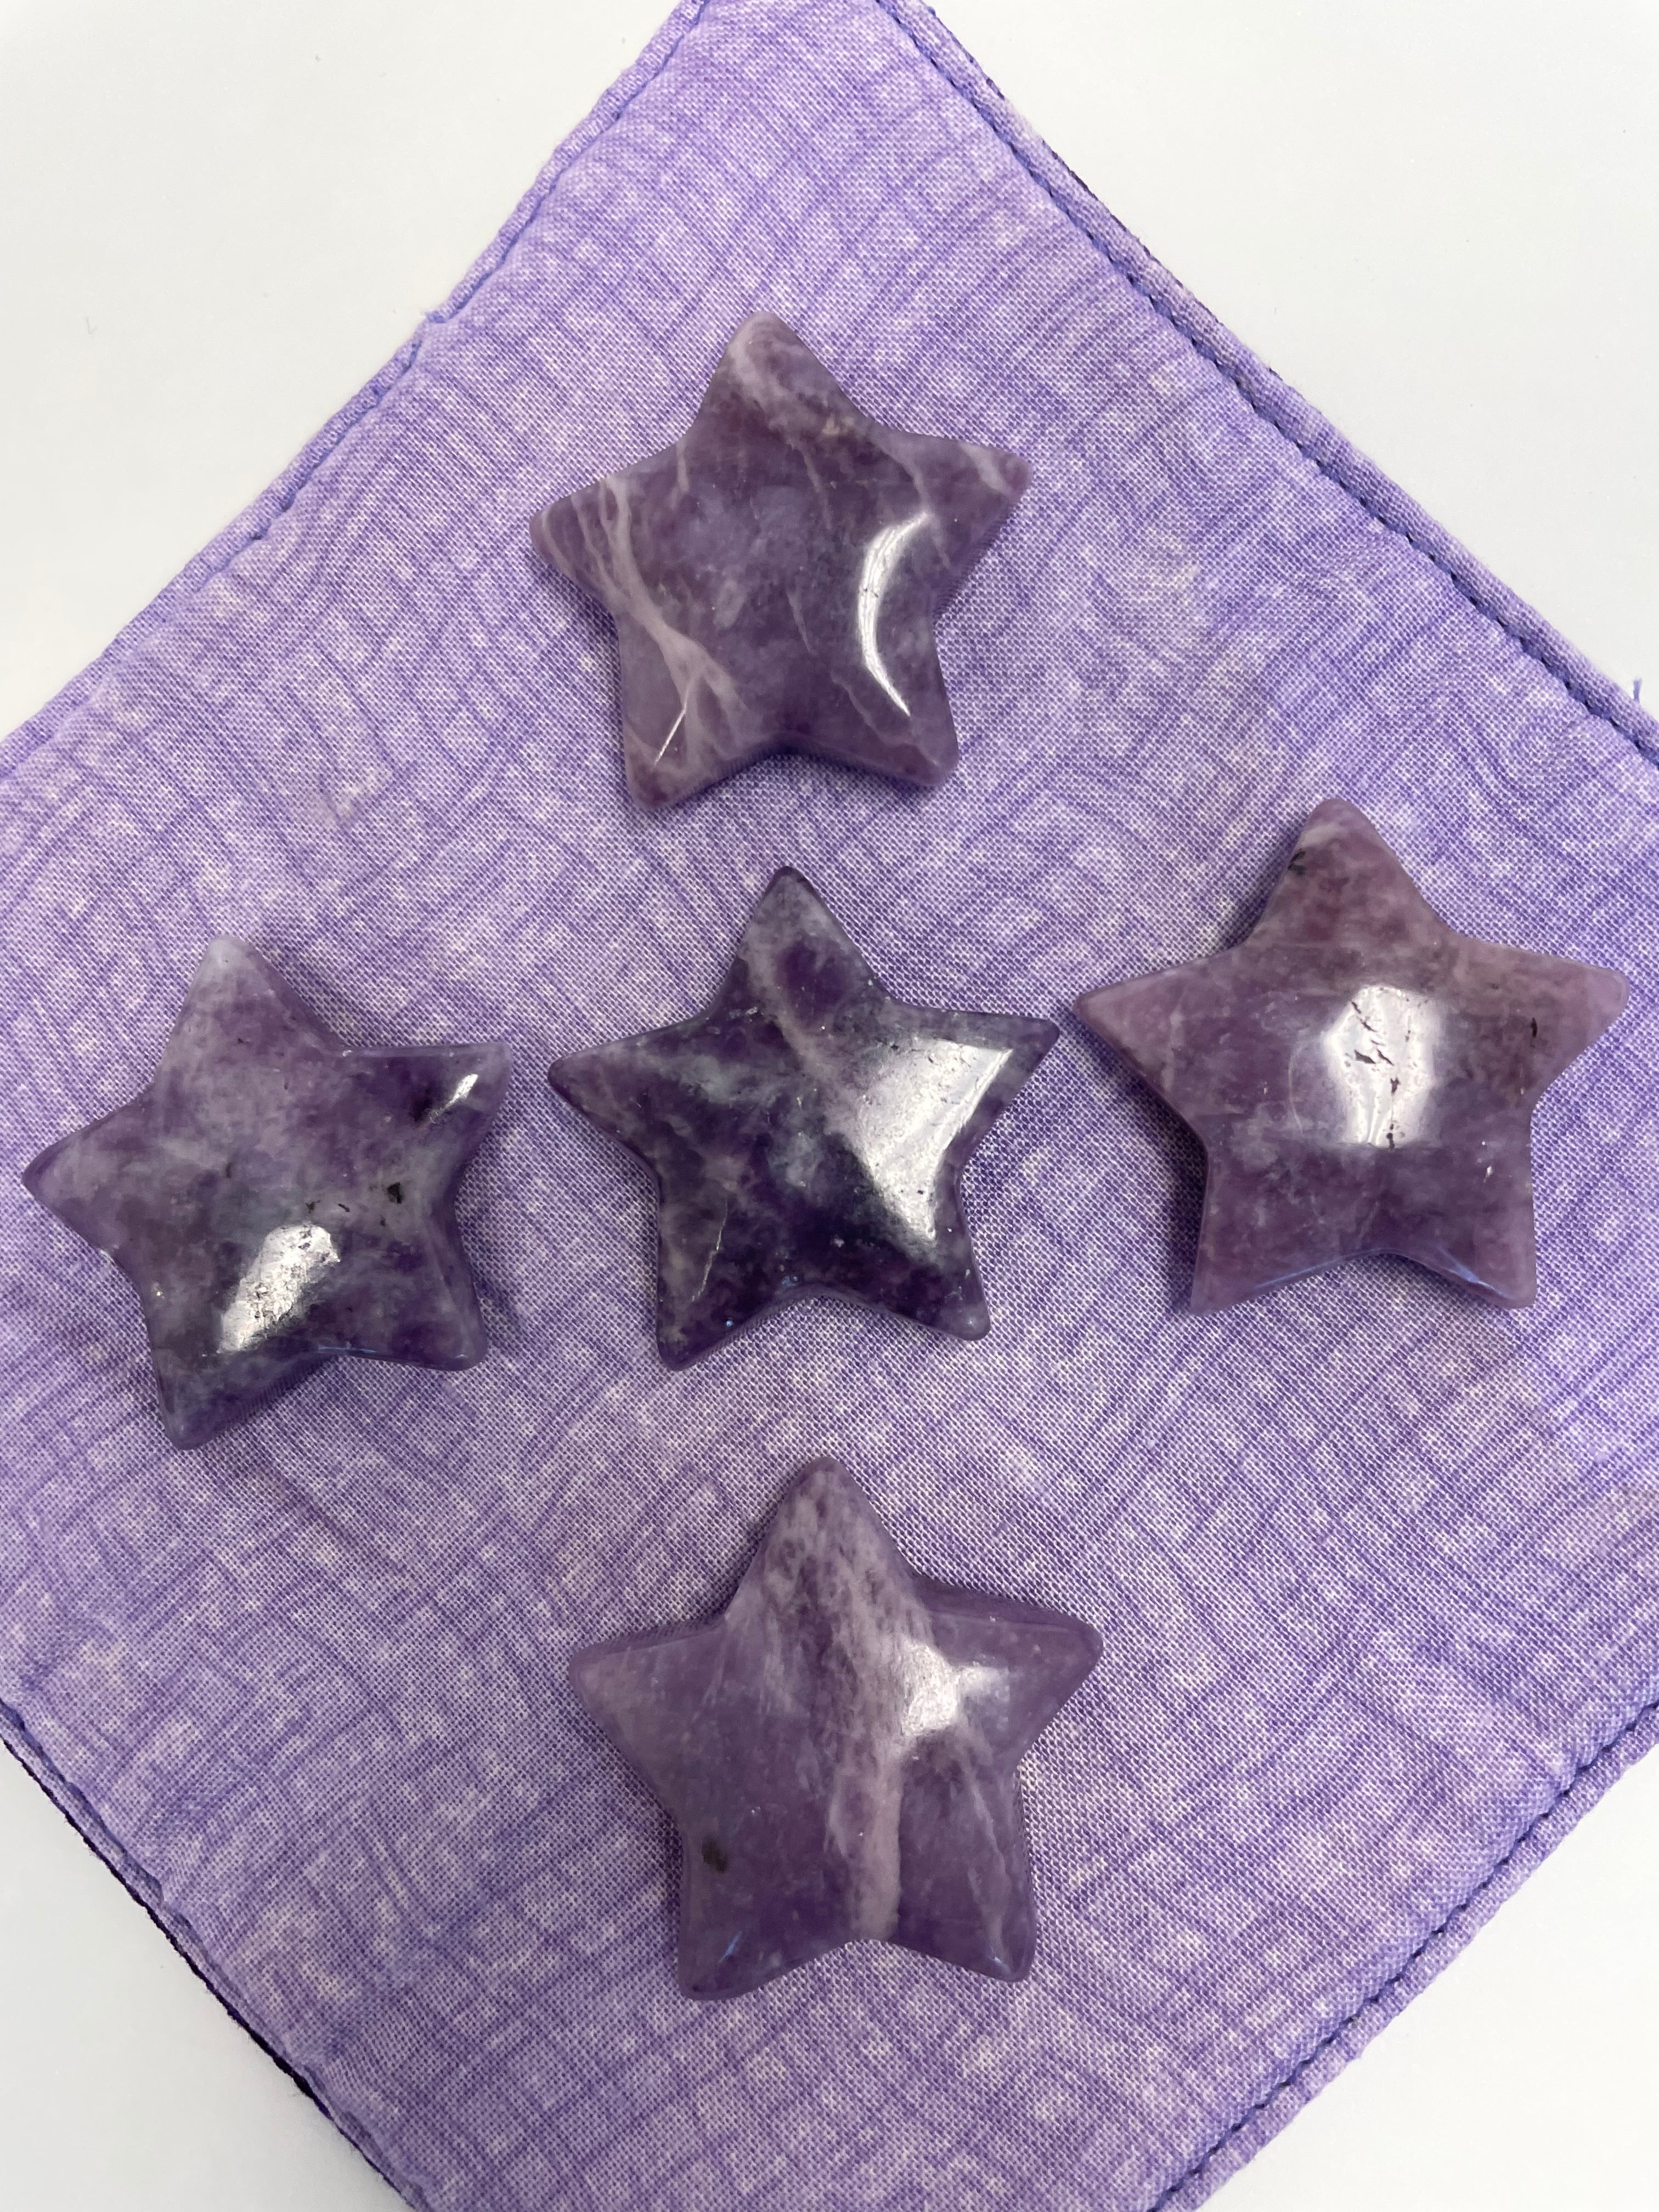 Another view of several lepidolite stars. This lovely little Lepidolite star can be used for meditation, healing, for your altar, on your computer to clear EMRs, or as décor for any room in your home or office. Easy to slip right into your pocket so you can take the energy of lepidolite everywhere you go. Approximately 1¼". Cost is $6 for one star. 